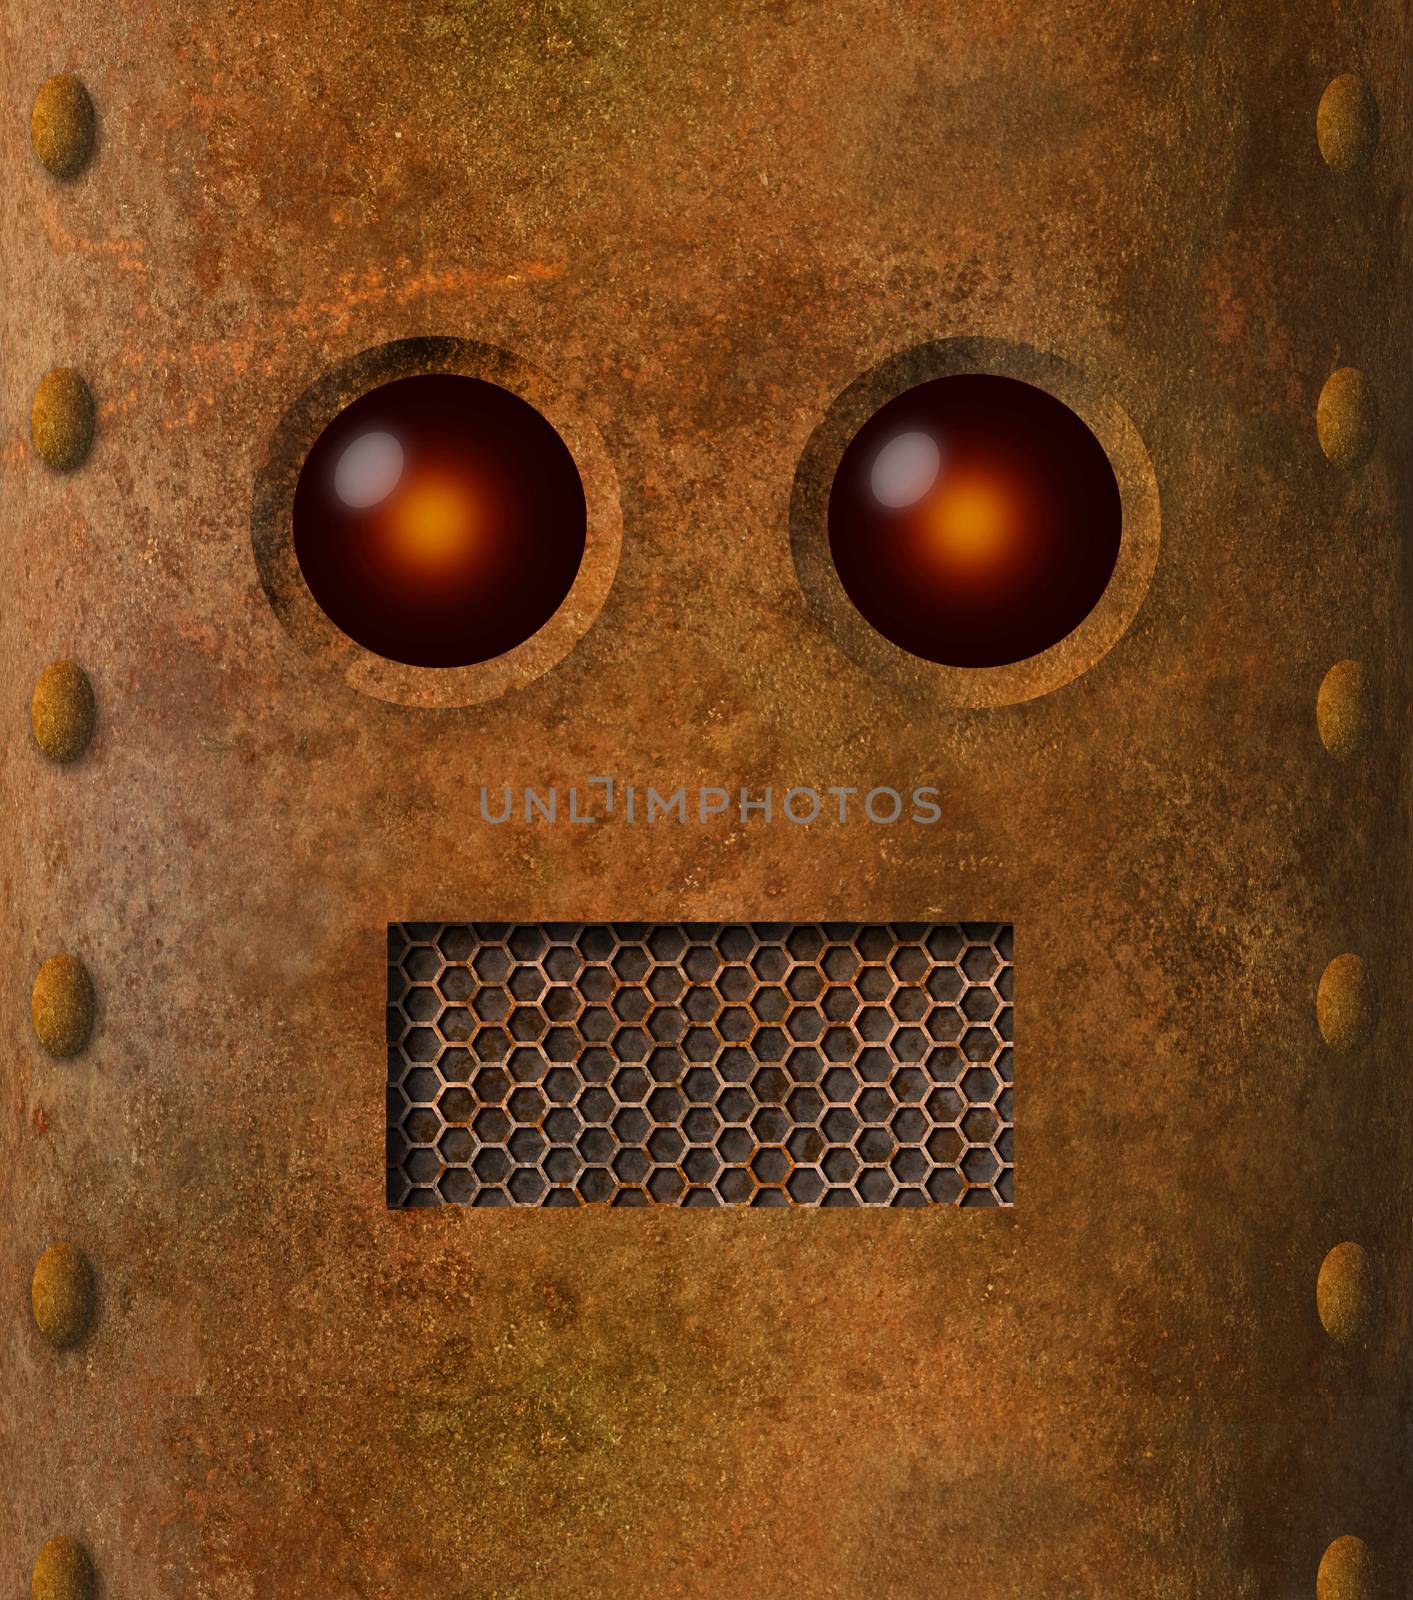 Grungy rusty robot face with grille mouth and lens-like eyes